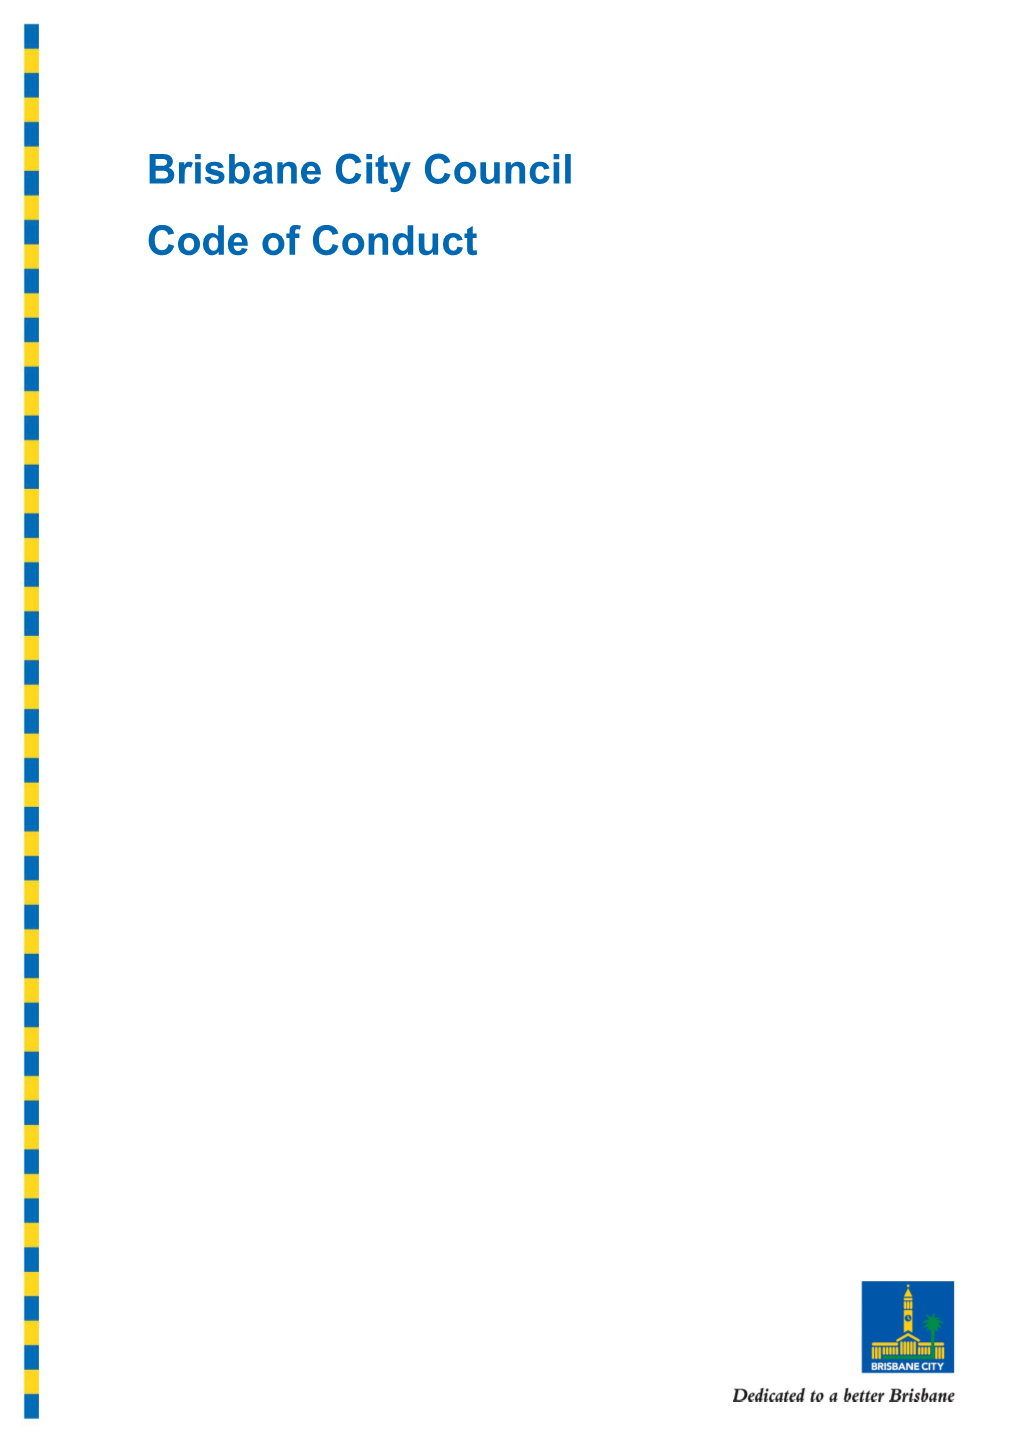 Code of Conduct s5